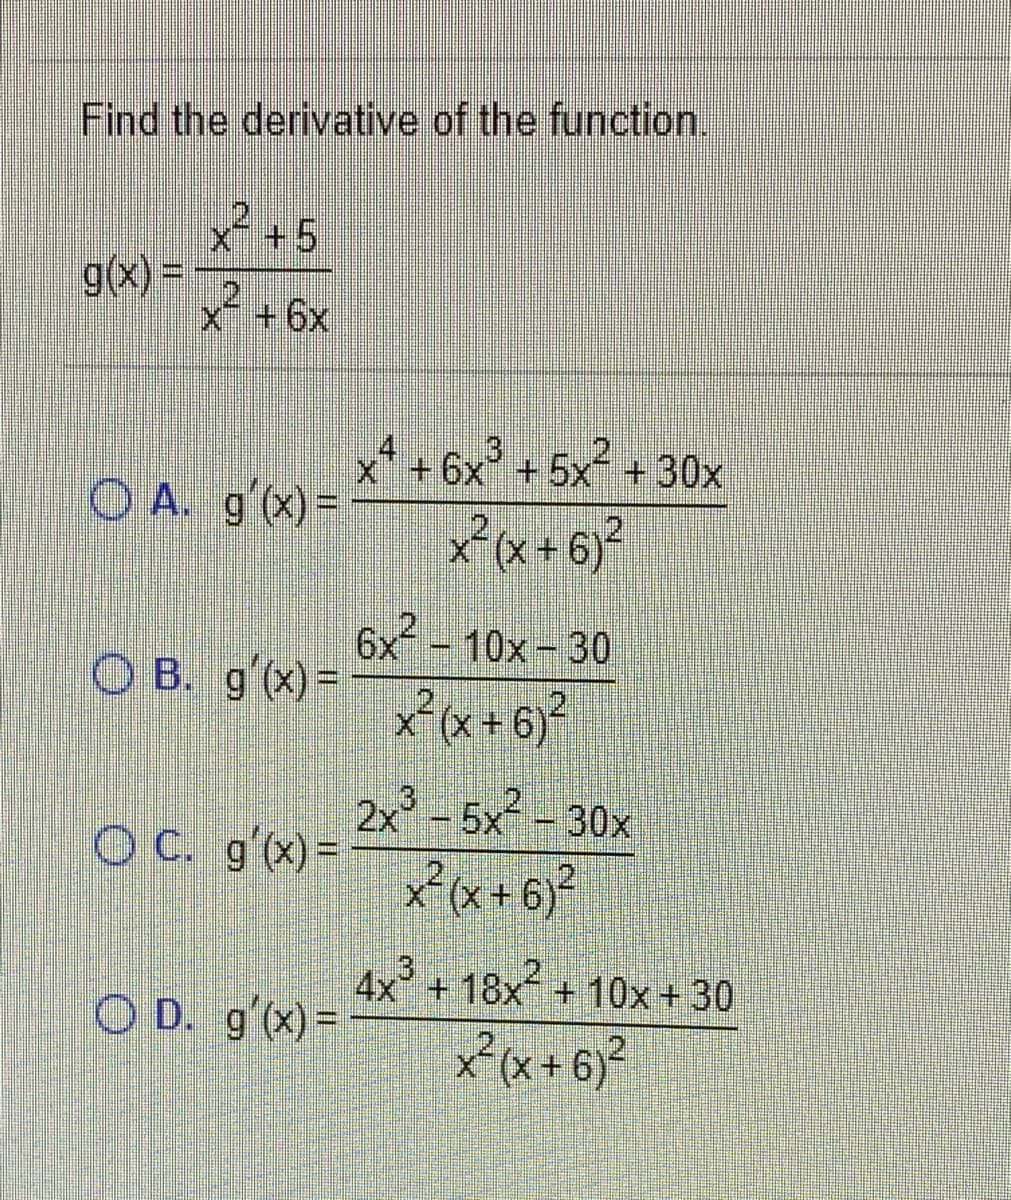 Find the derivative of the function.
x+5
g(x) =
21
X +6x
3
.2
x+6x +5x´ + 30x
O A. g'(x)-
x°(x + 6)?
6x
O B. g'(x)=
xx+6}?
-10x-30
2.
2x -5x-30x
OC. gx)=
.3
4x + 18x + 10x +30
O D. g'(x)=
xx+6)*
